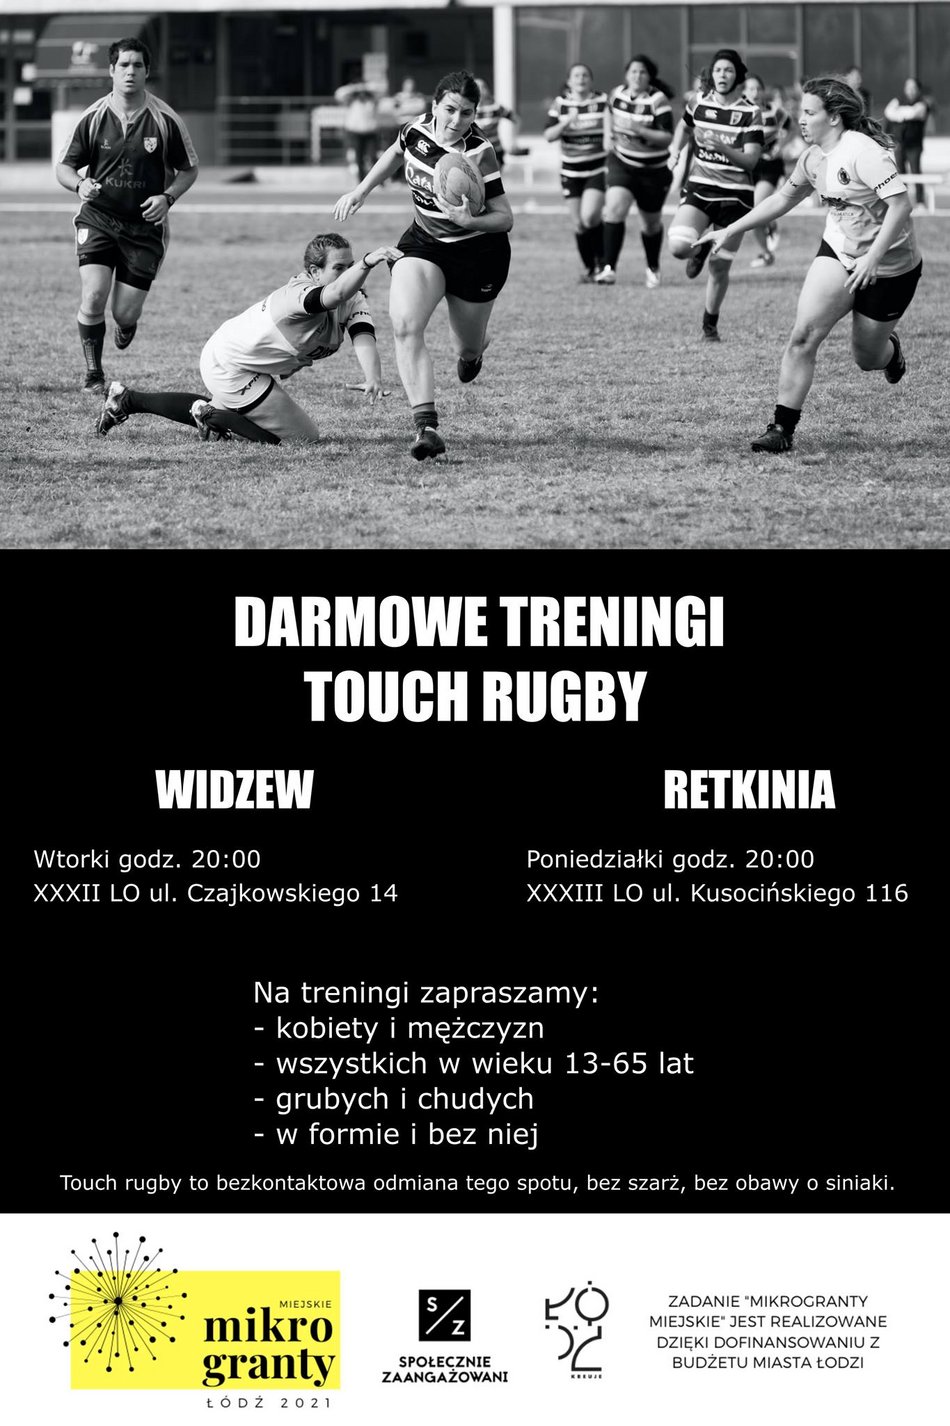 fot. mat. touch rugby